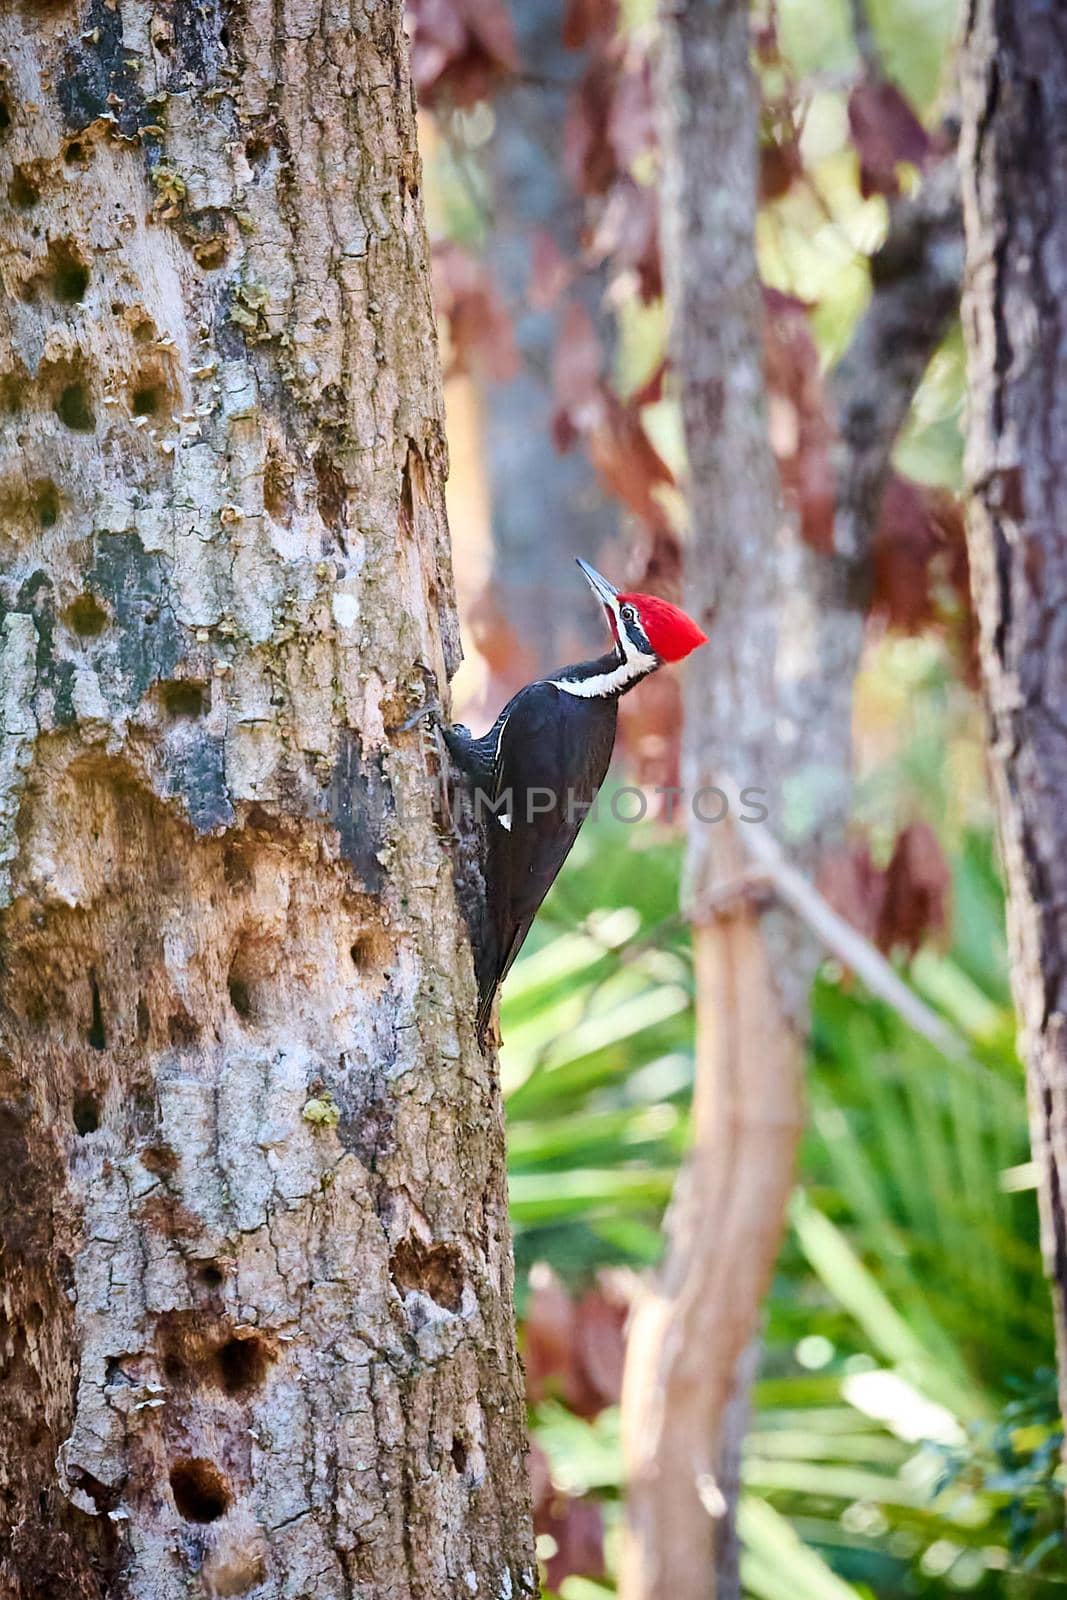 Male Pileated Woodpecker searching for insects at Skidaway Island State Park, GA. by patrickstock